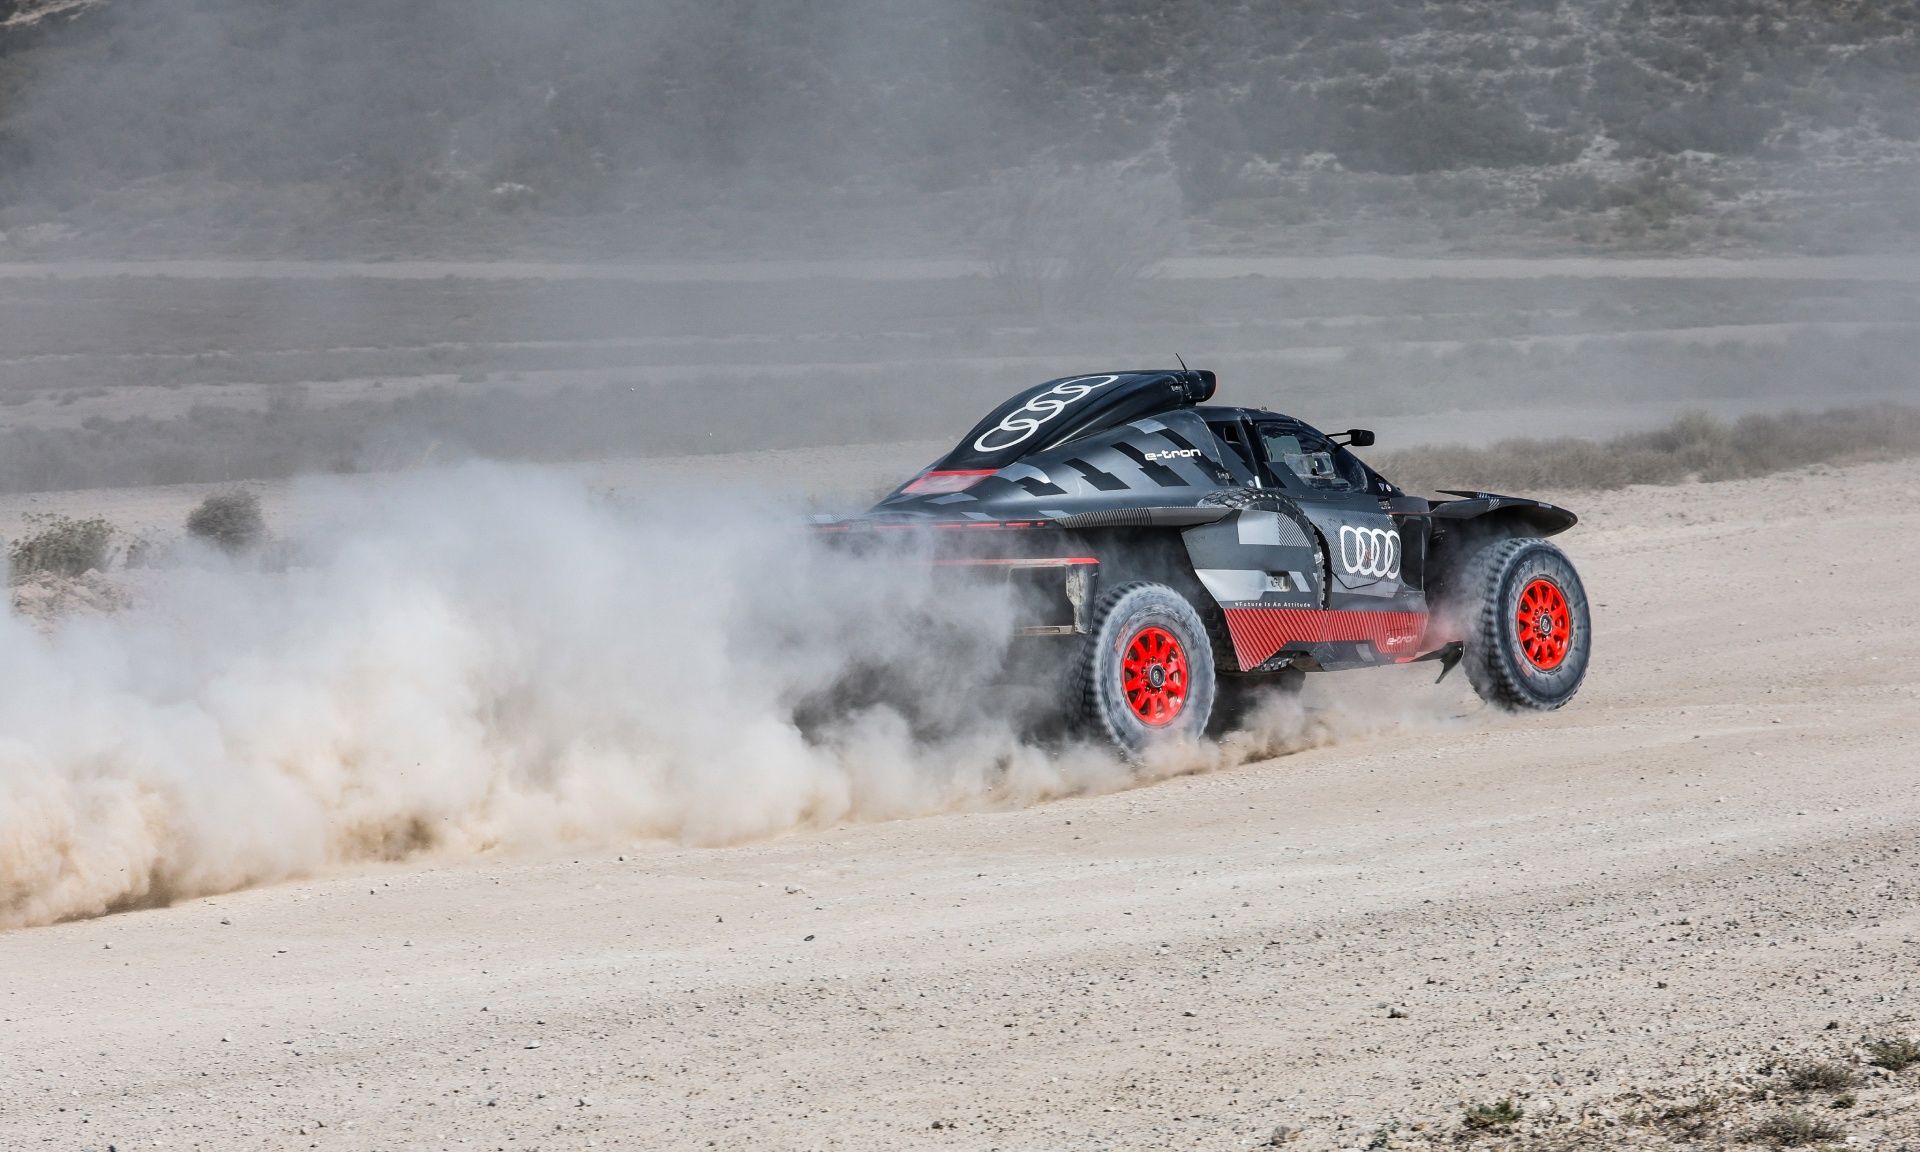 The Audi RS Q e-tron driving on a gravel track.